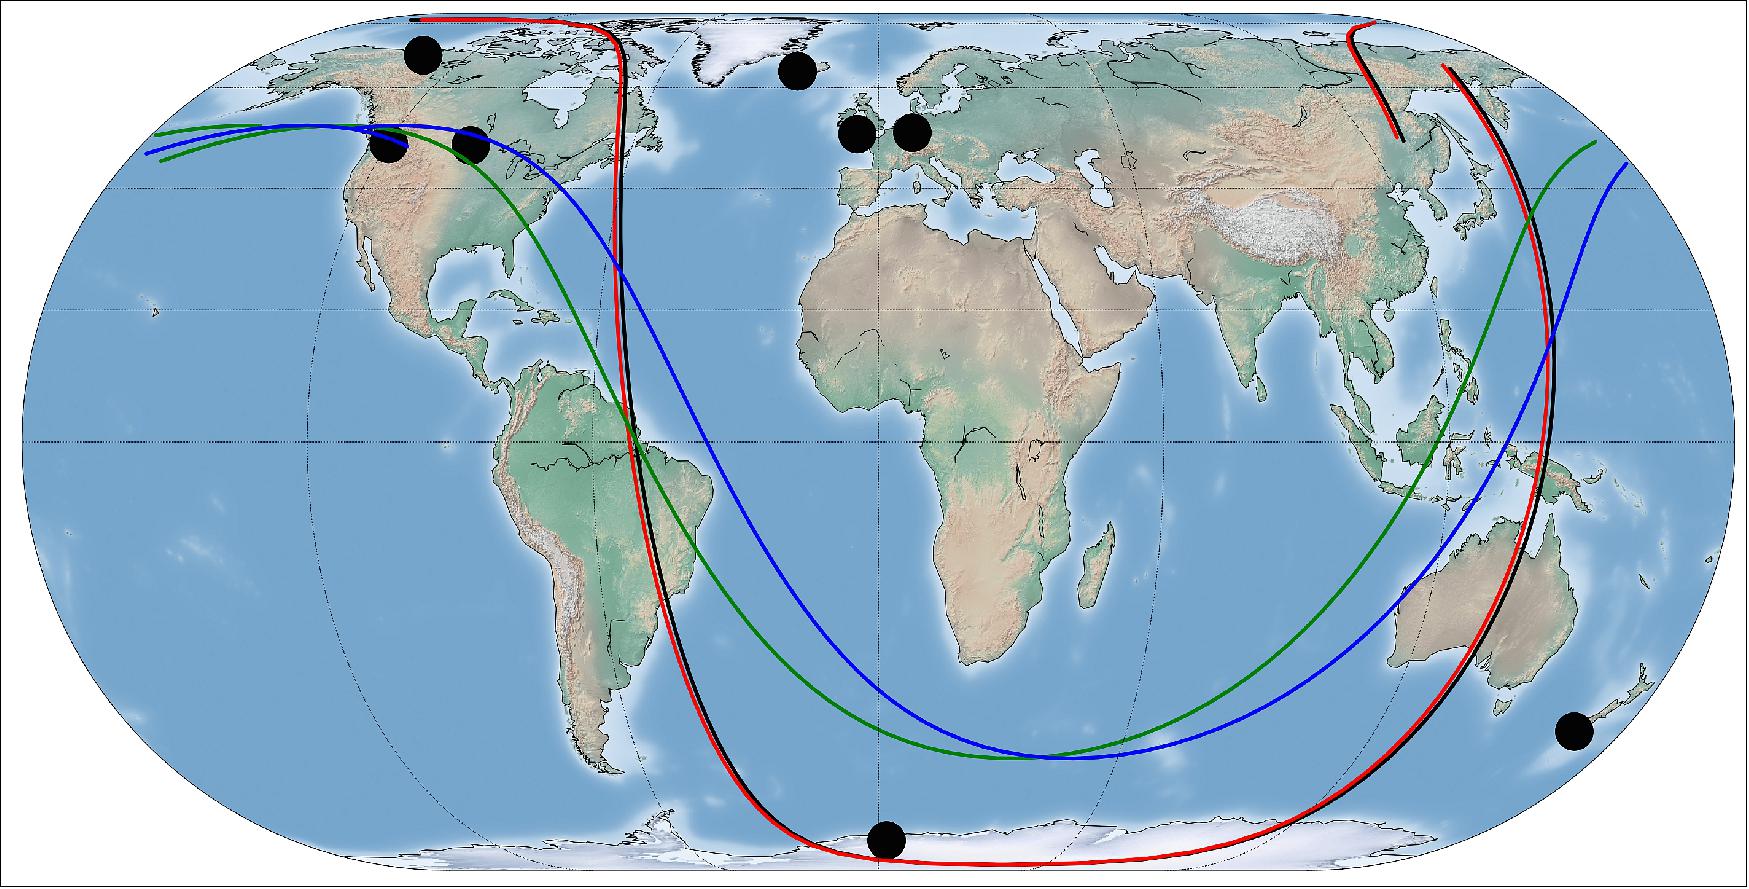 Figure 27: Location of X-band ground station antennas (black circles) and ground tracks of representative Dove satellites per flock (Flock 2P = Black, Flock 3P = Red, Flock 2E = Blue, Green), image credit: Planet Labs (Ref. 6)